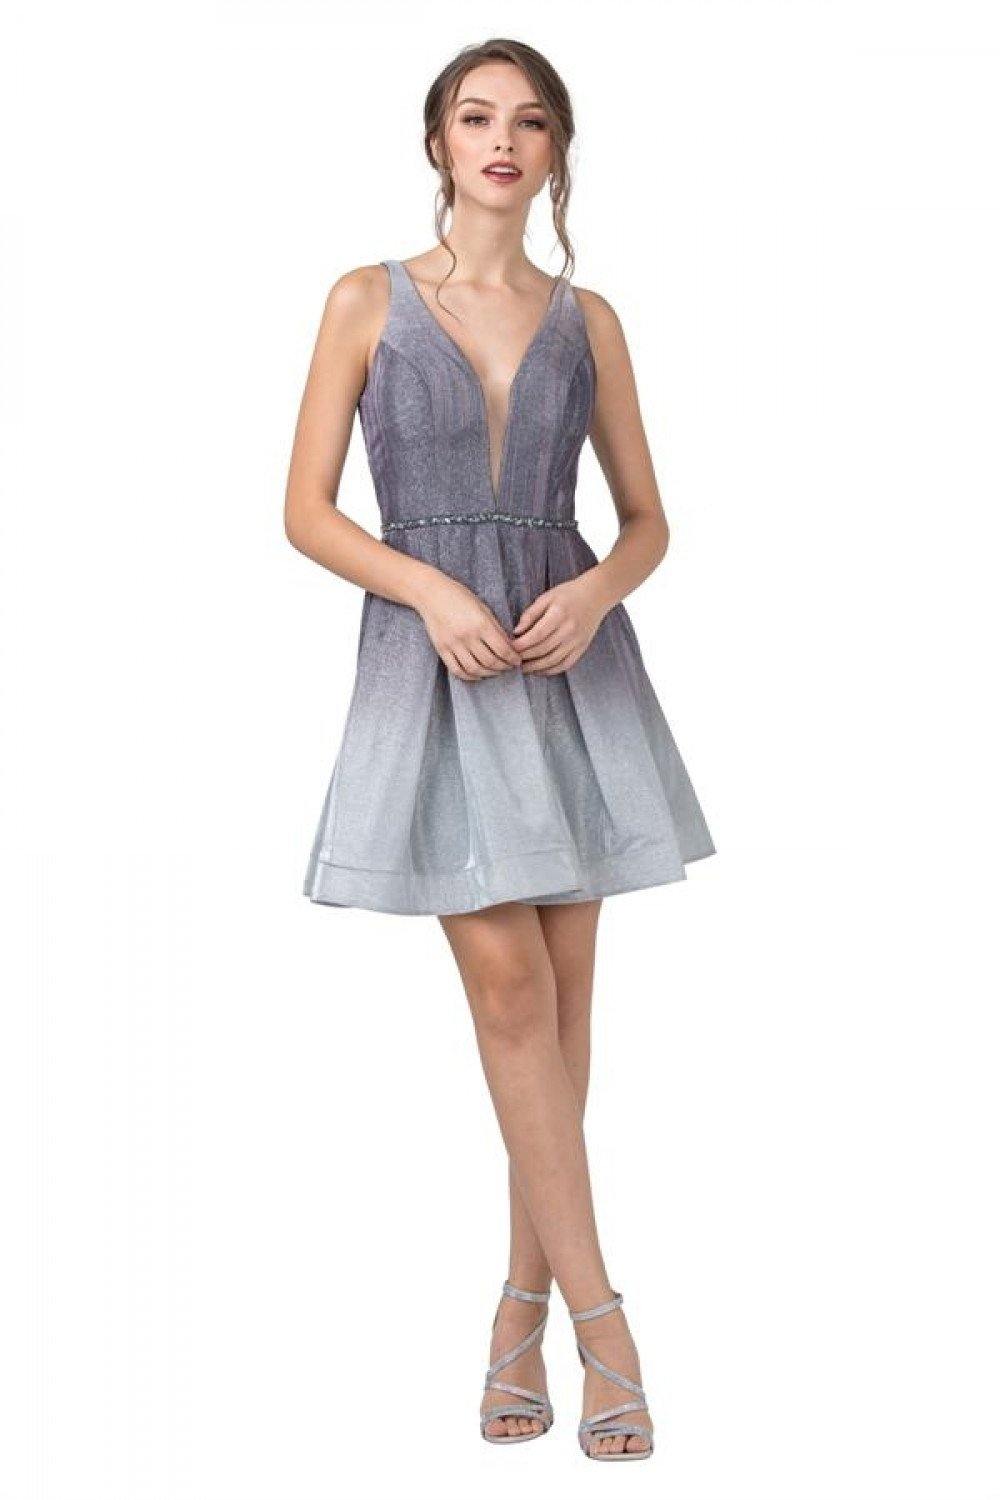 Appliqued Back Ombre Homecoming Short Dress - The Dress Outlet ASpeed